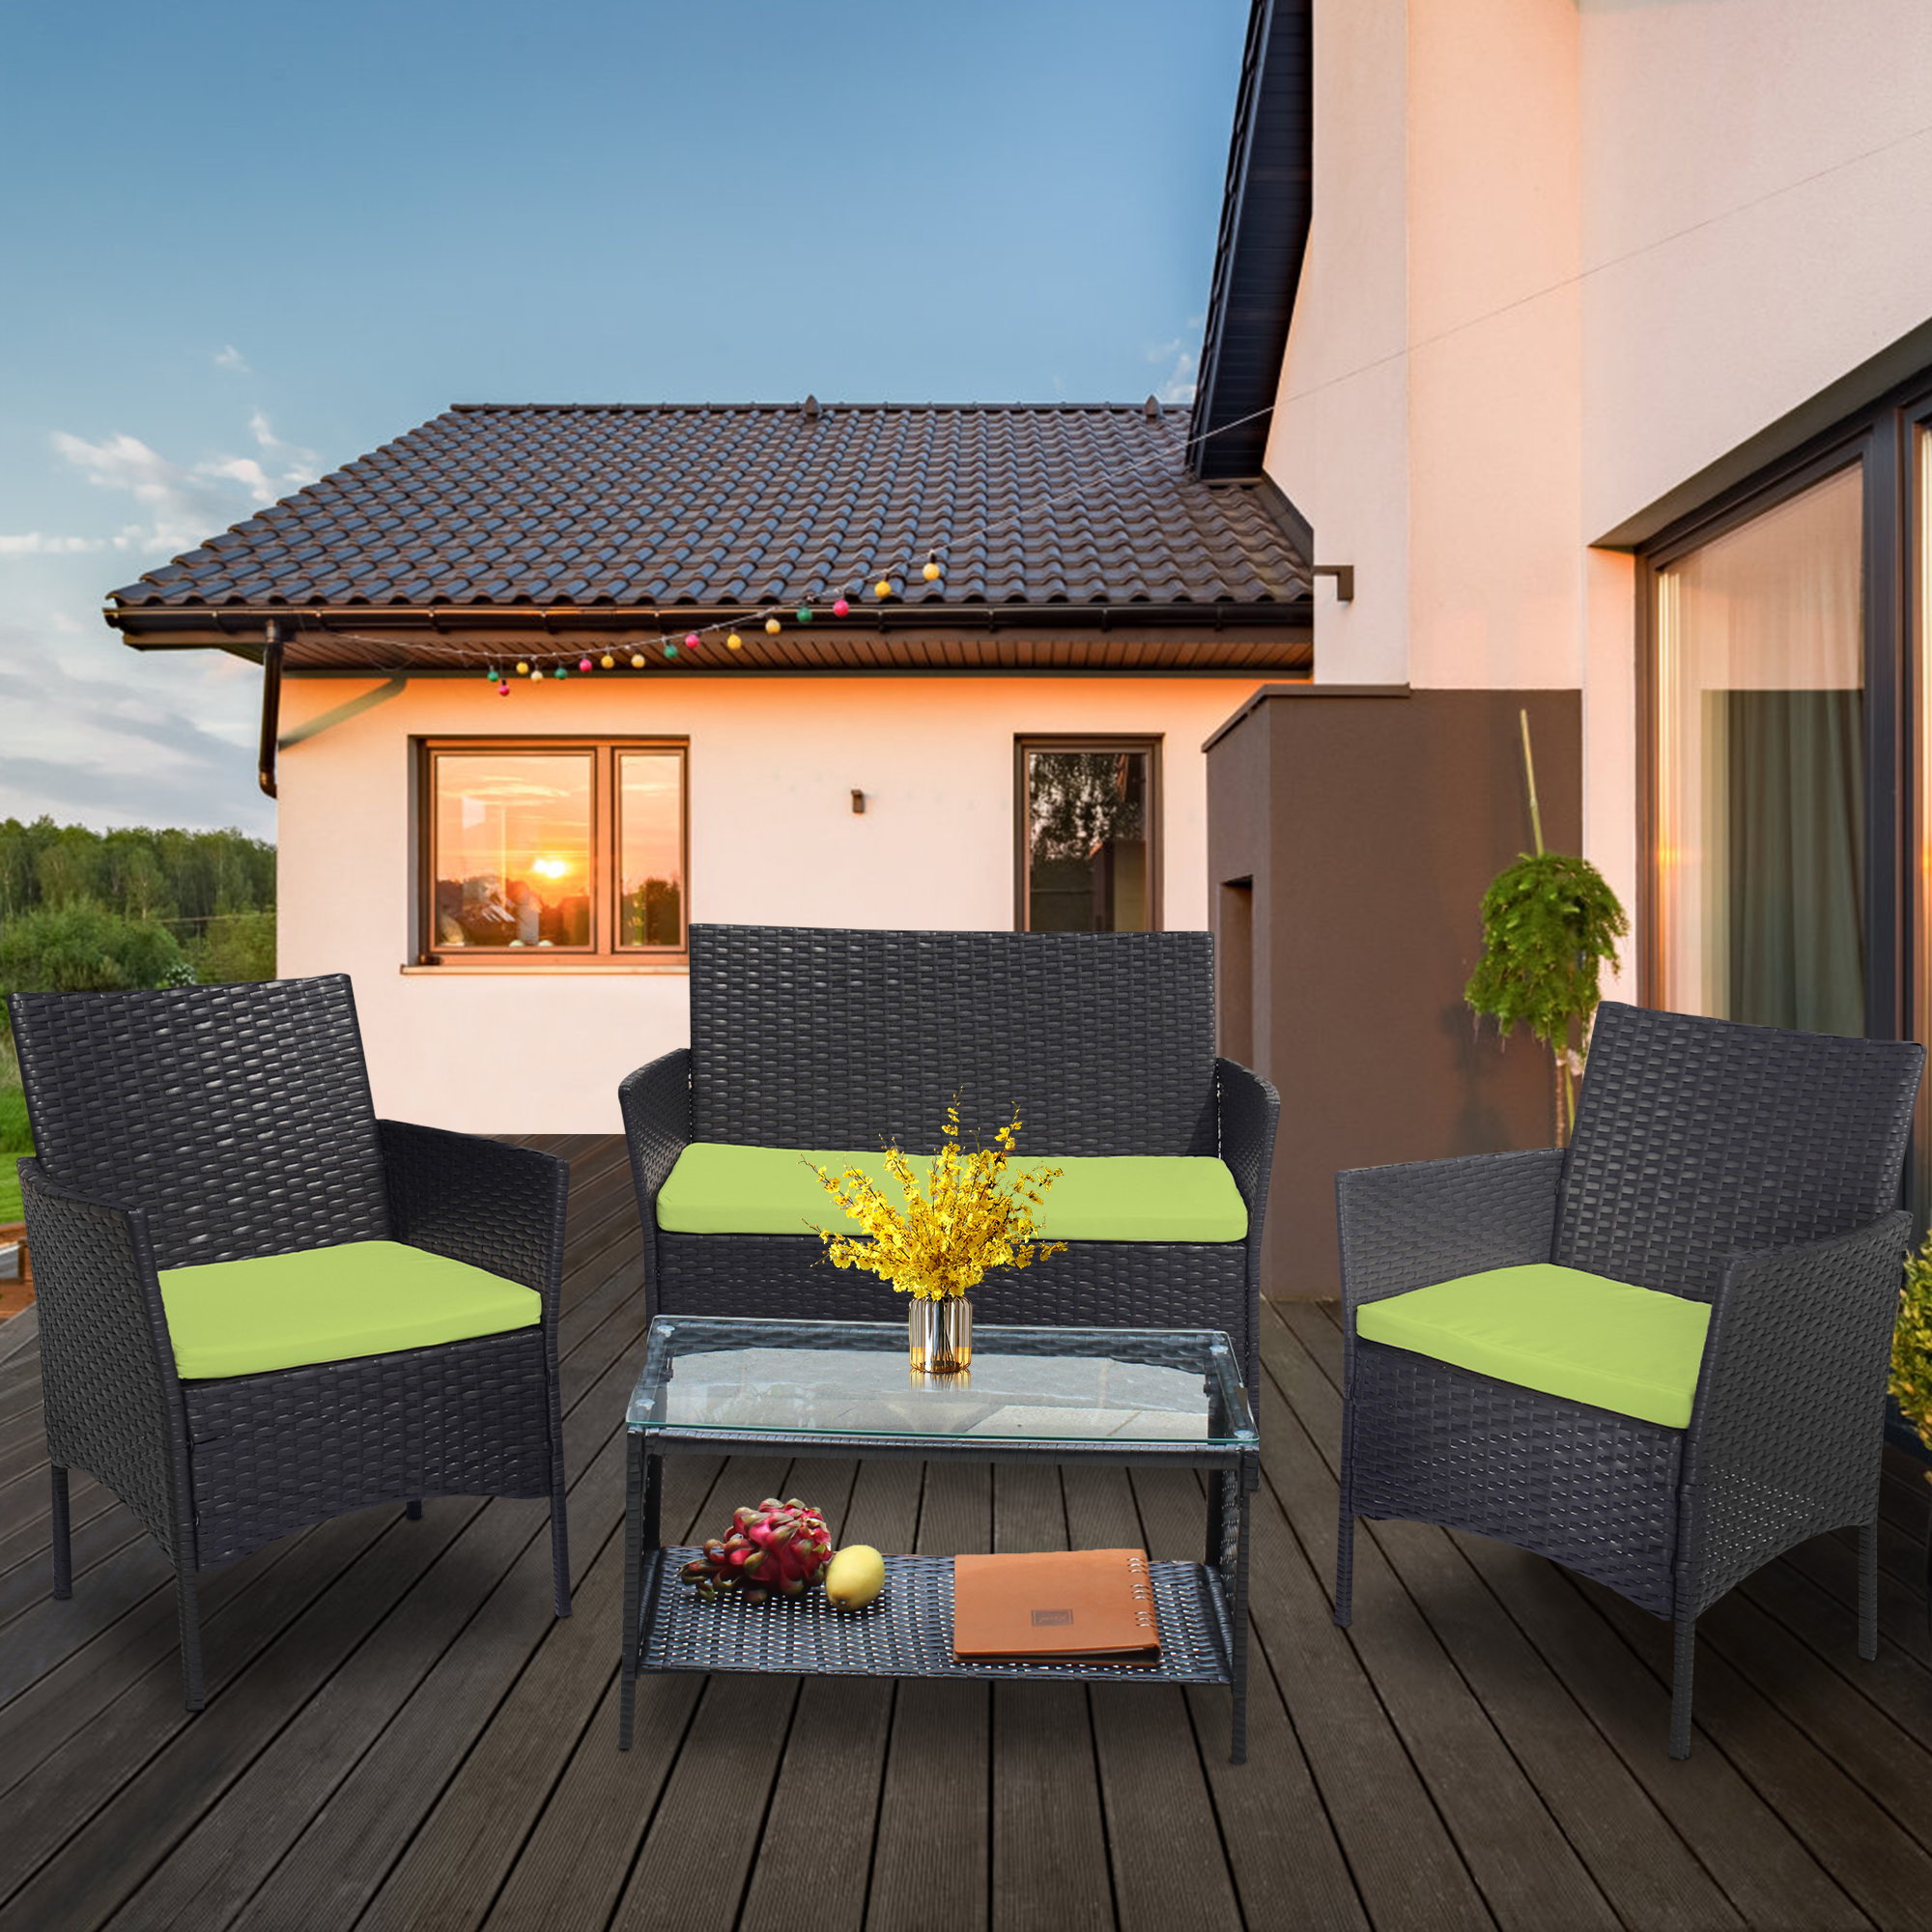 8-Piece Patio Outdoor Rattan Chair, Bistro Table Conversation Set with Soft Cushion & Glass Table, Patio Rattan Conversation Furniture Set, Leisure Furniture Set for Garden Backyard Balcony, T204 - image 4 of 9